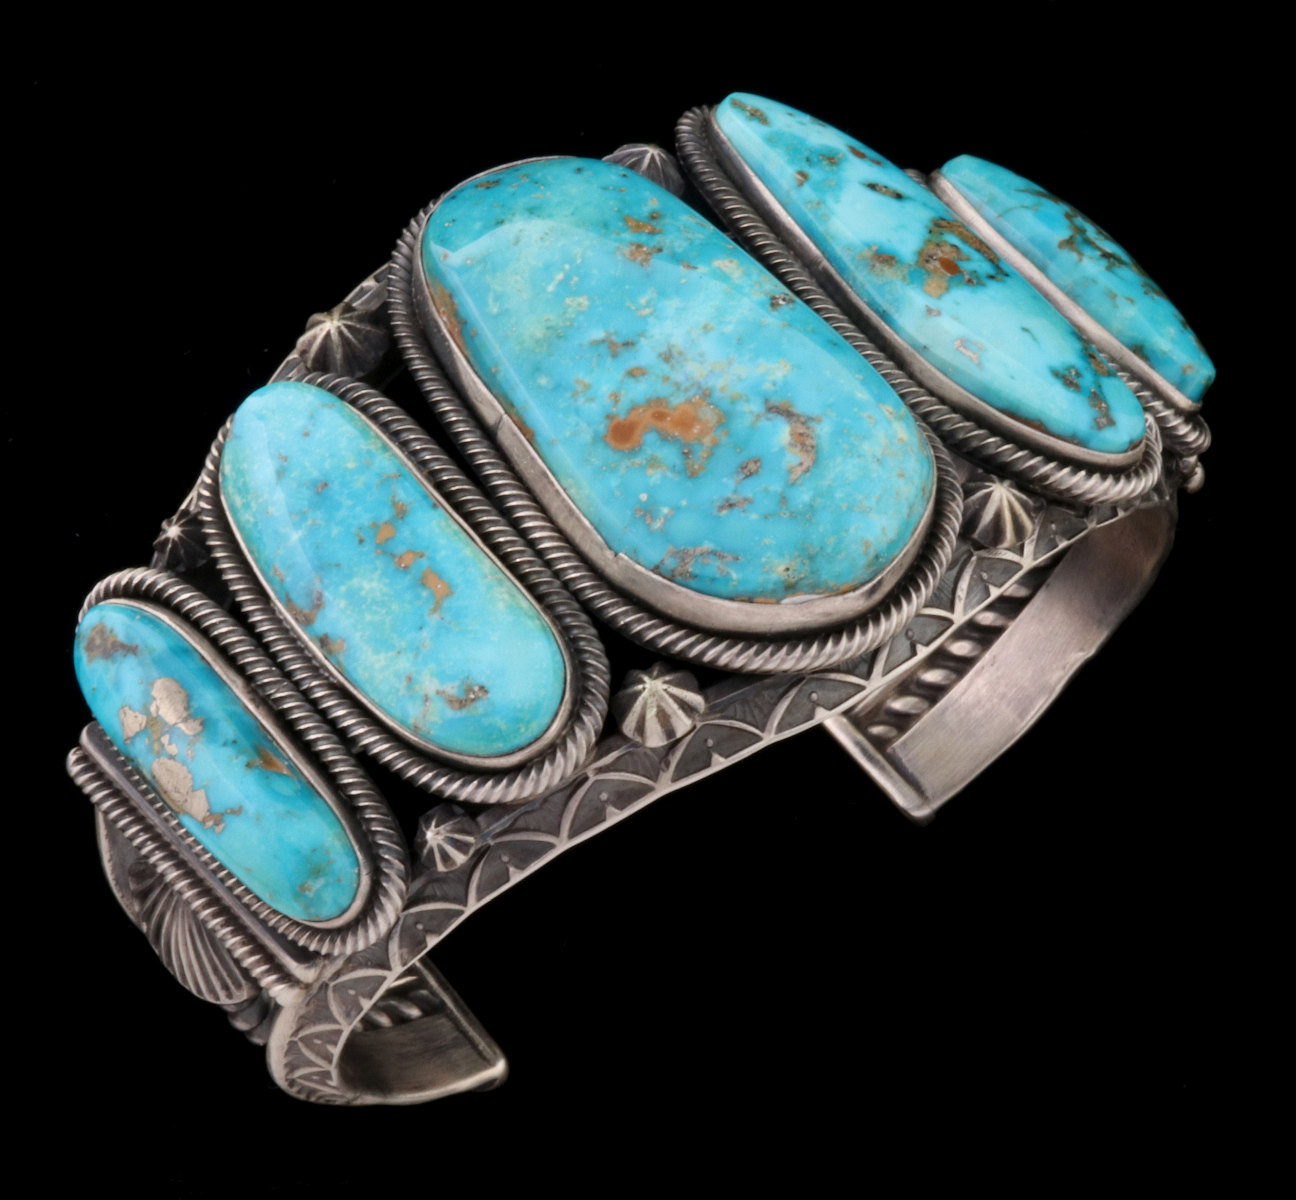 A GARY REEVES BRACELET WITH LARGE TURQUOISE CABOCHONS